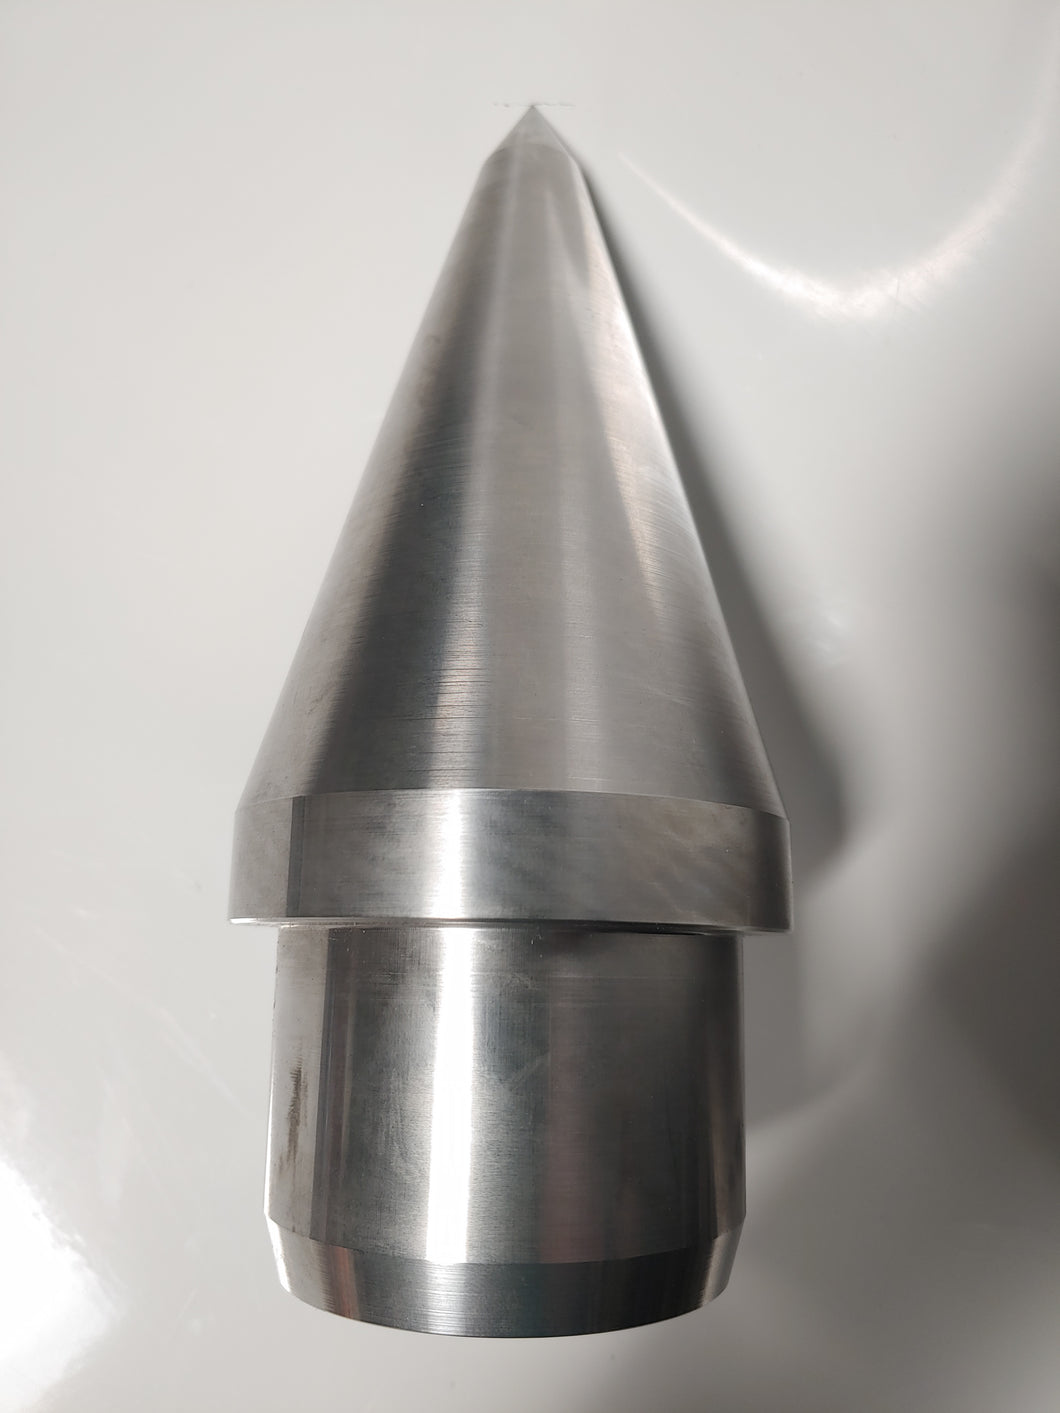 3 inch drain point and cap